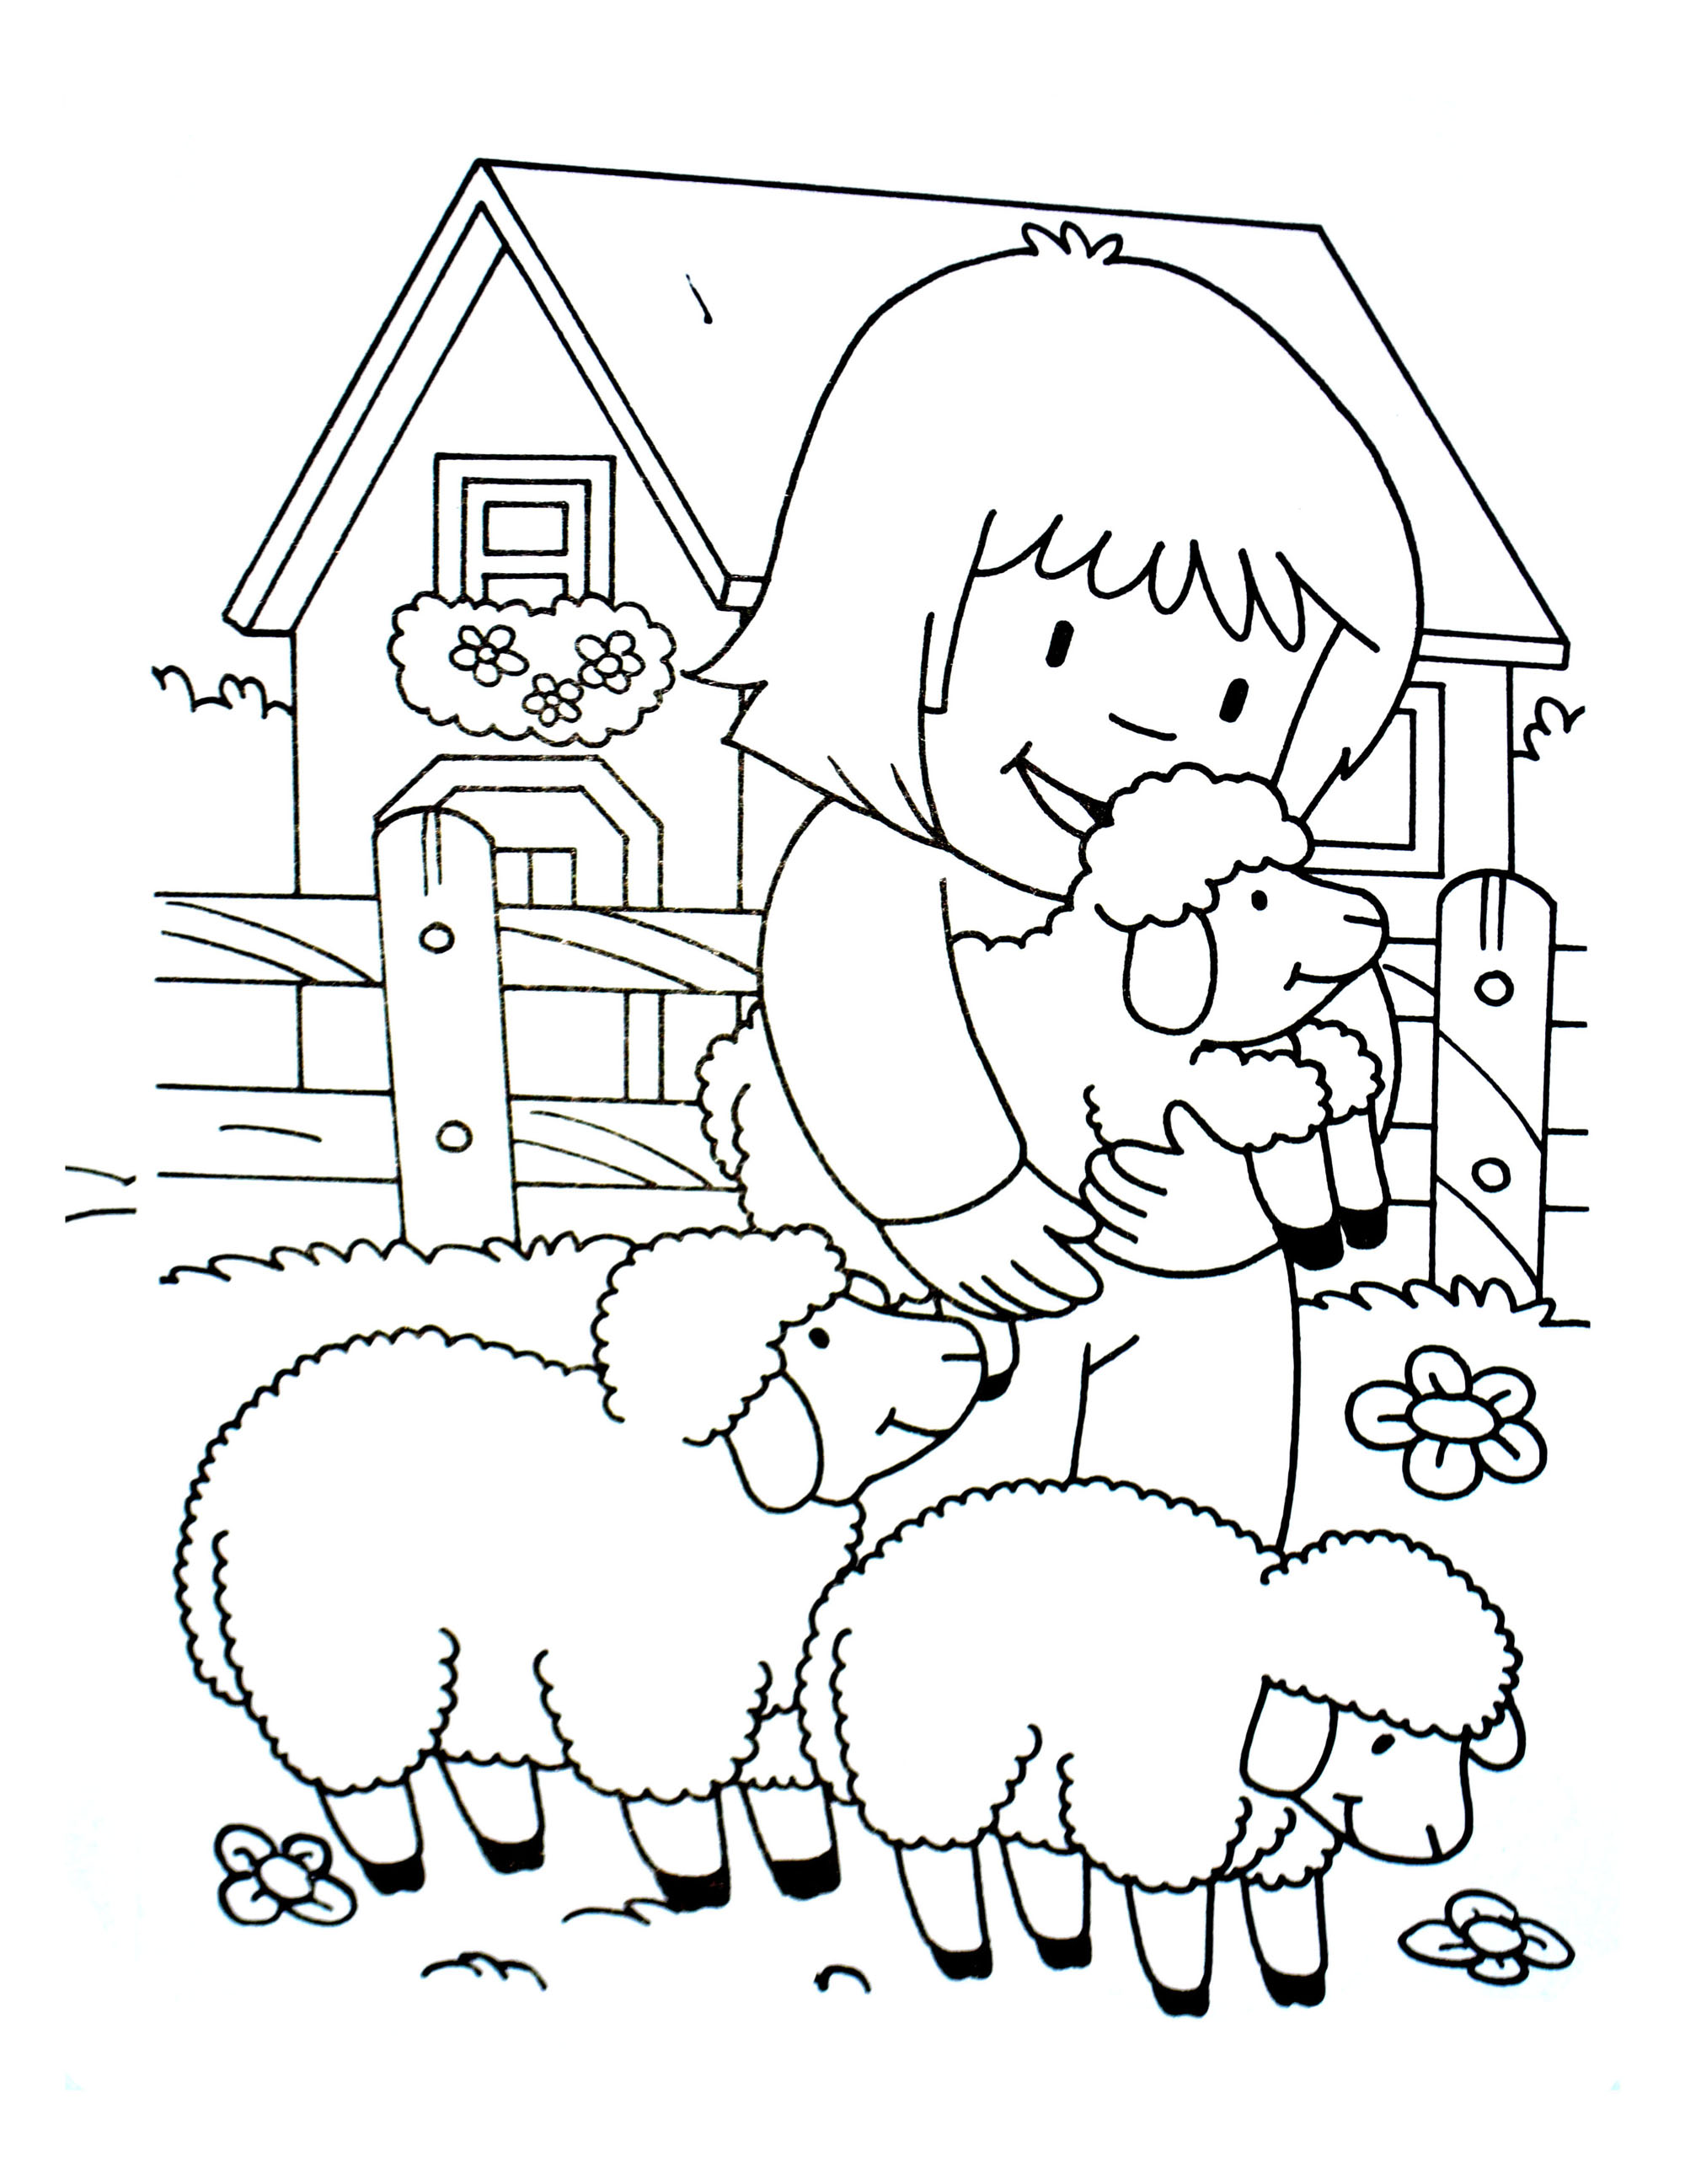 farm house coloring page